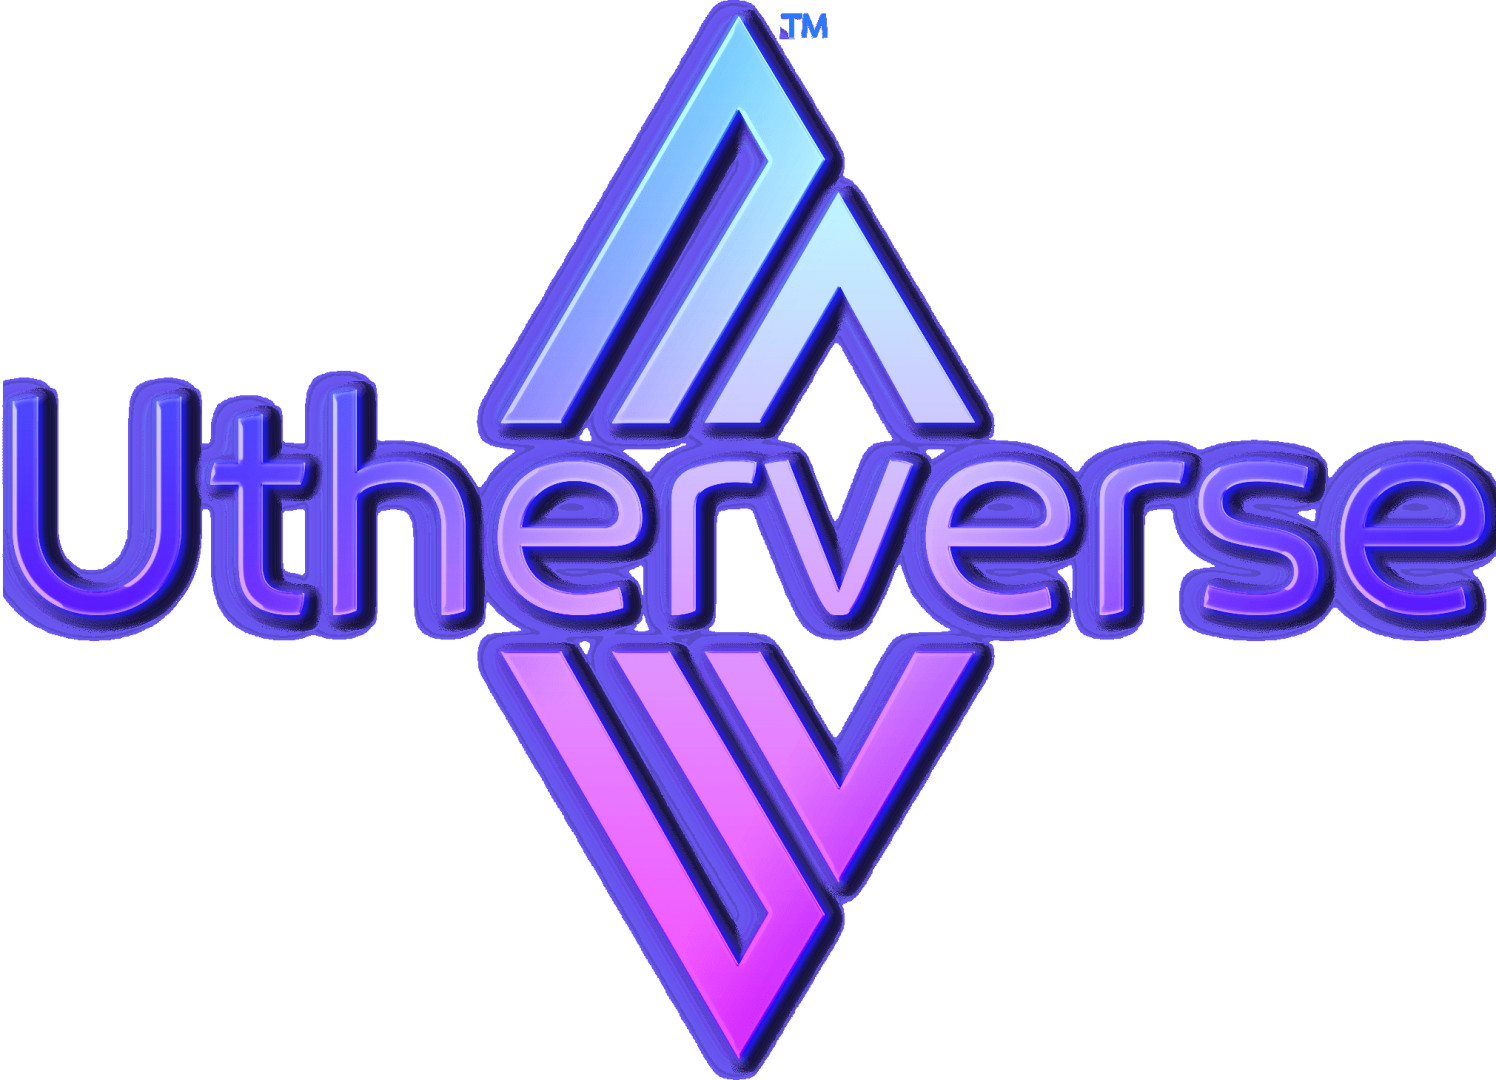 Utherverse Partners with Tokensoft to Launch IDO for Native Metaverse Token